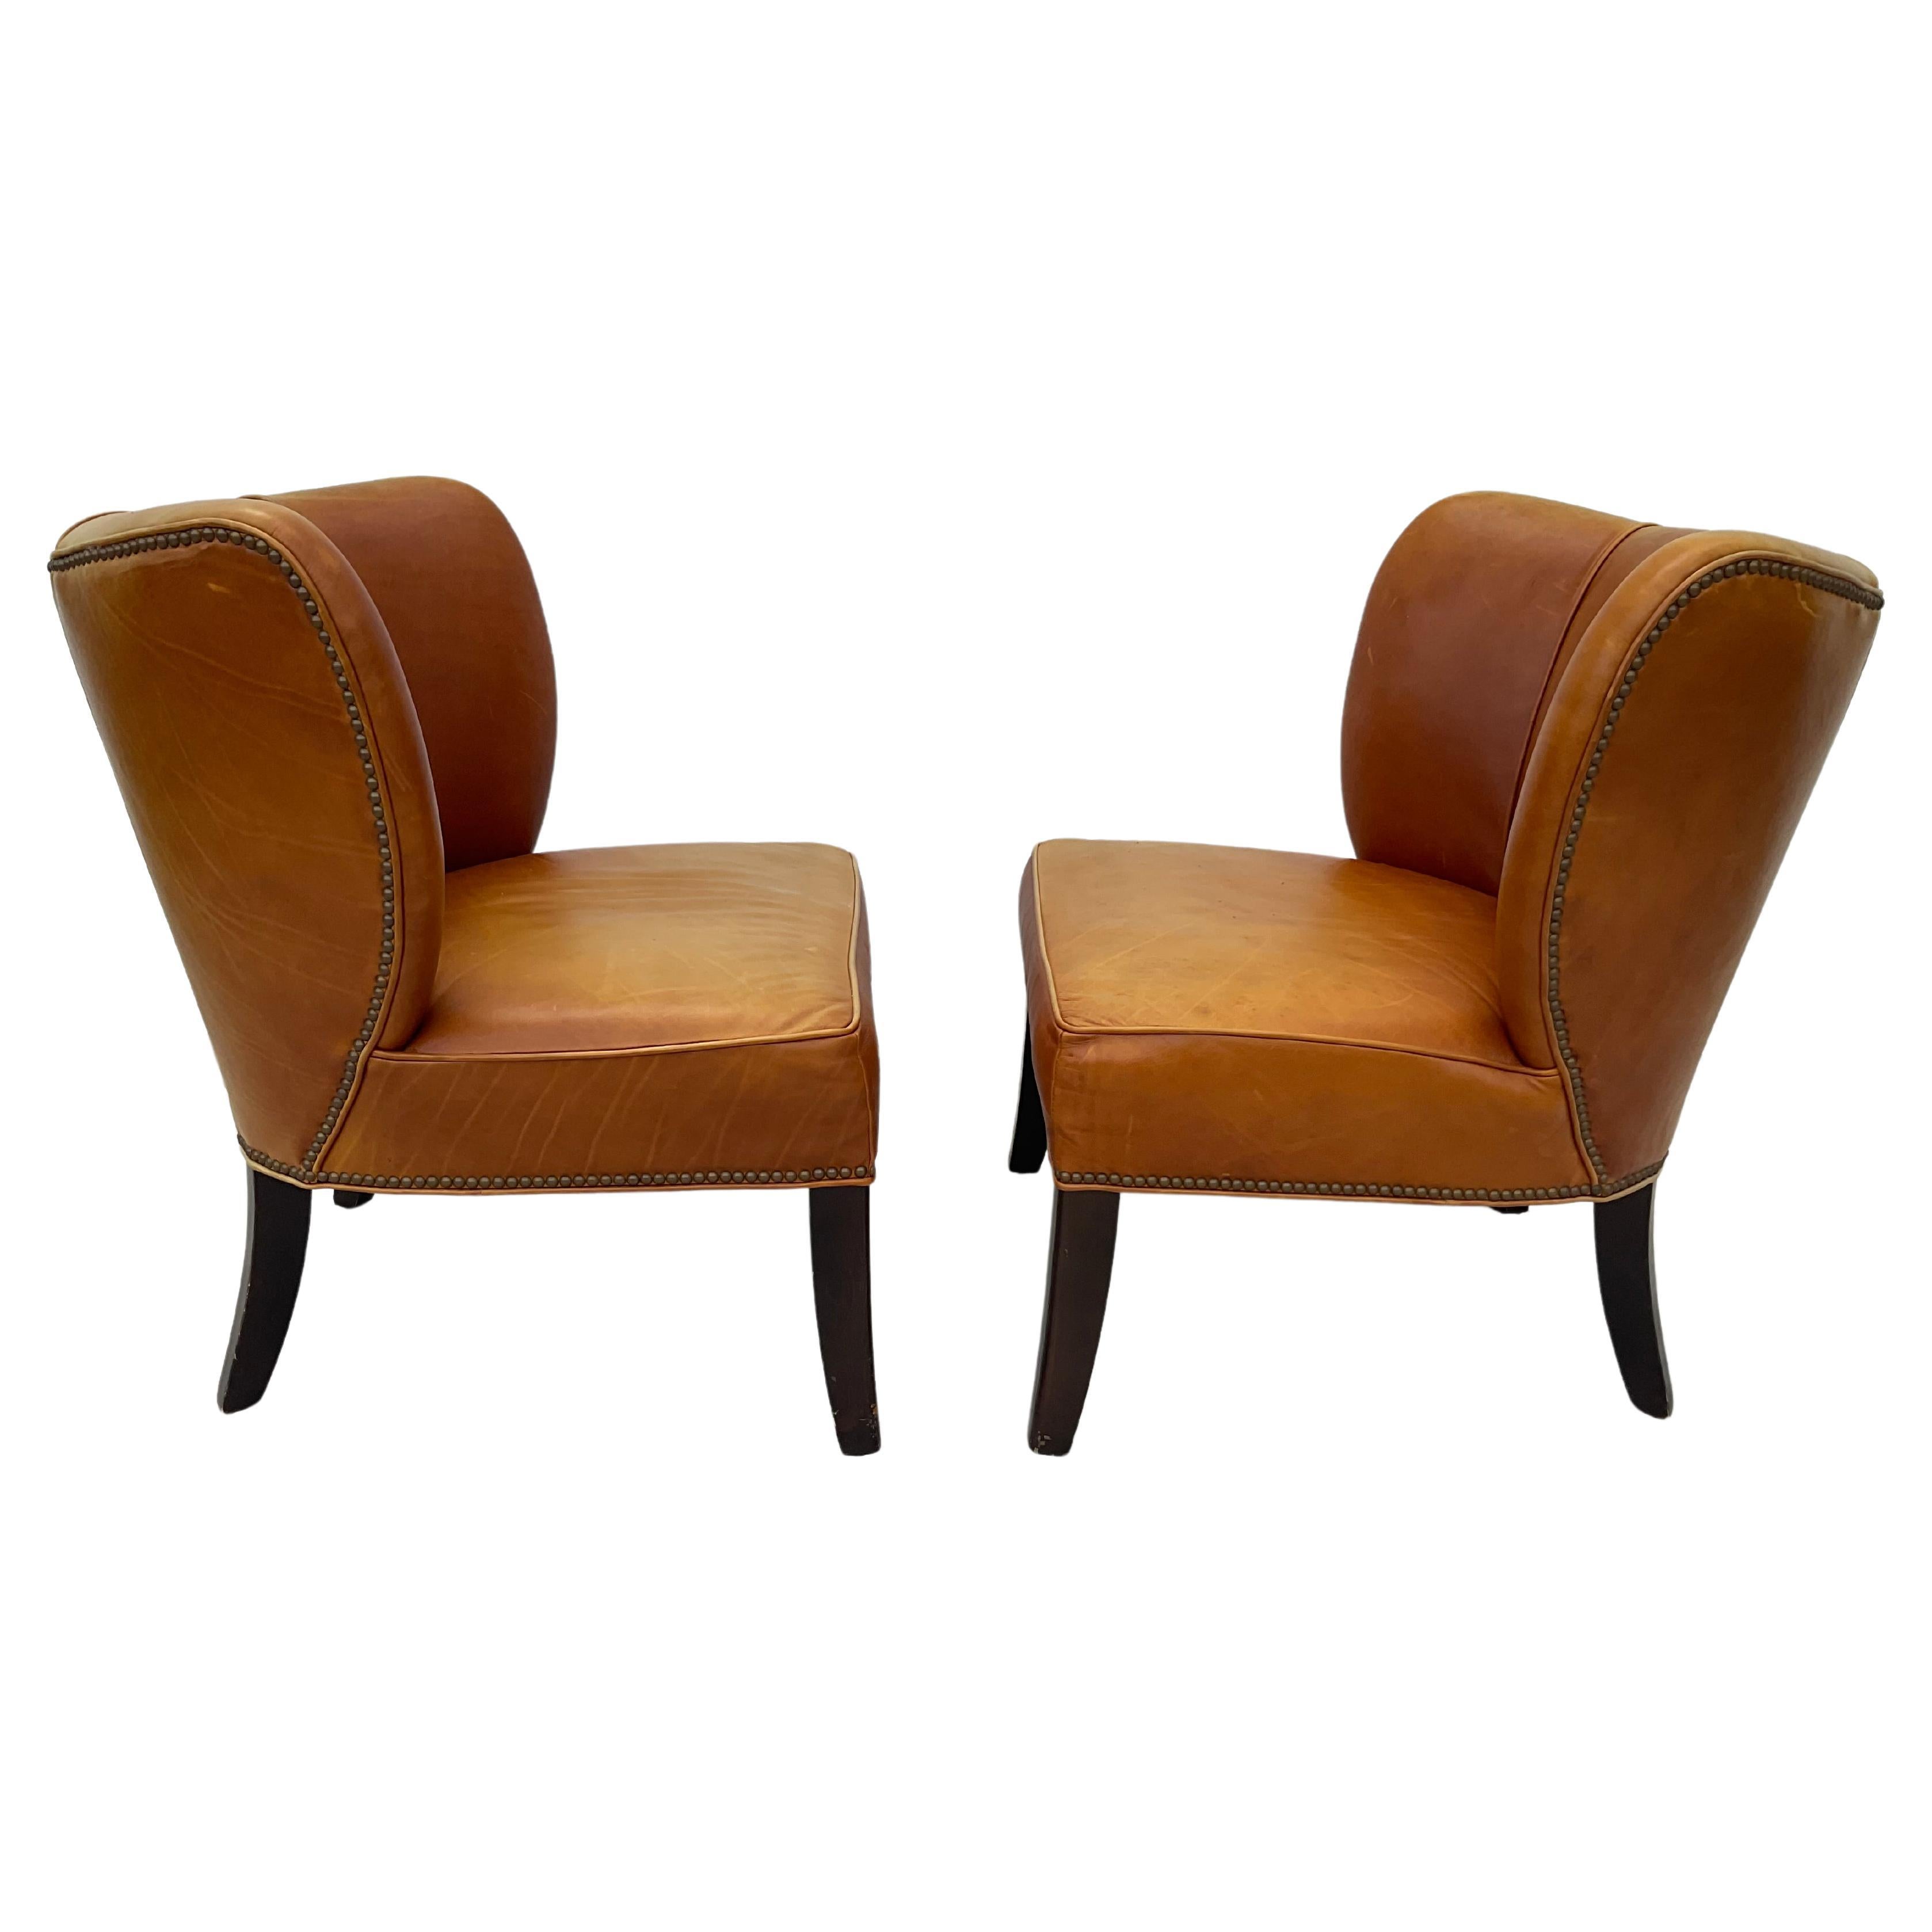 Pair Of Arhaus Italian Leather Lounge Chairs In Good Condition For Sale In Bradenton, FL